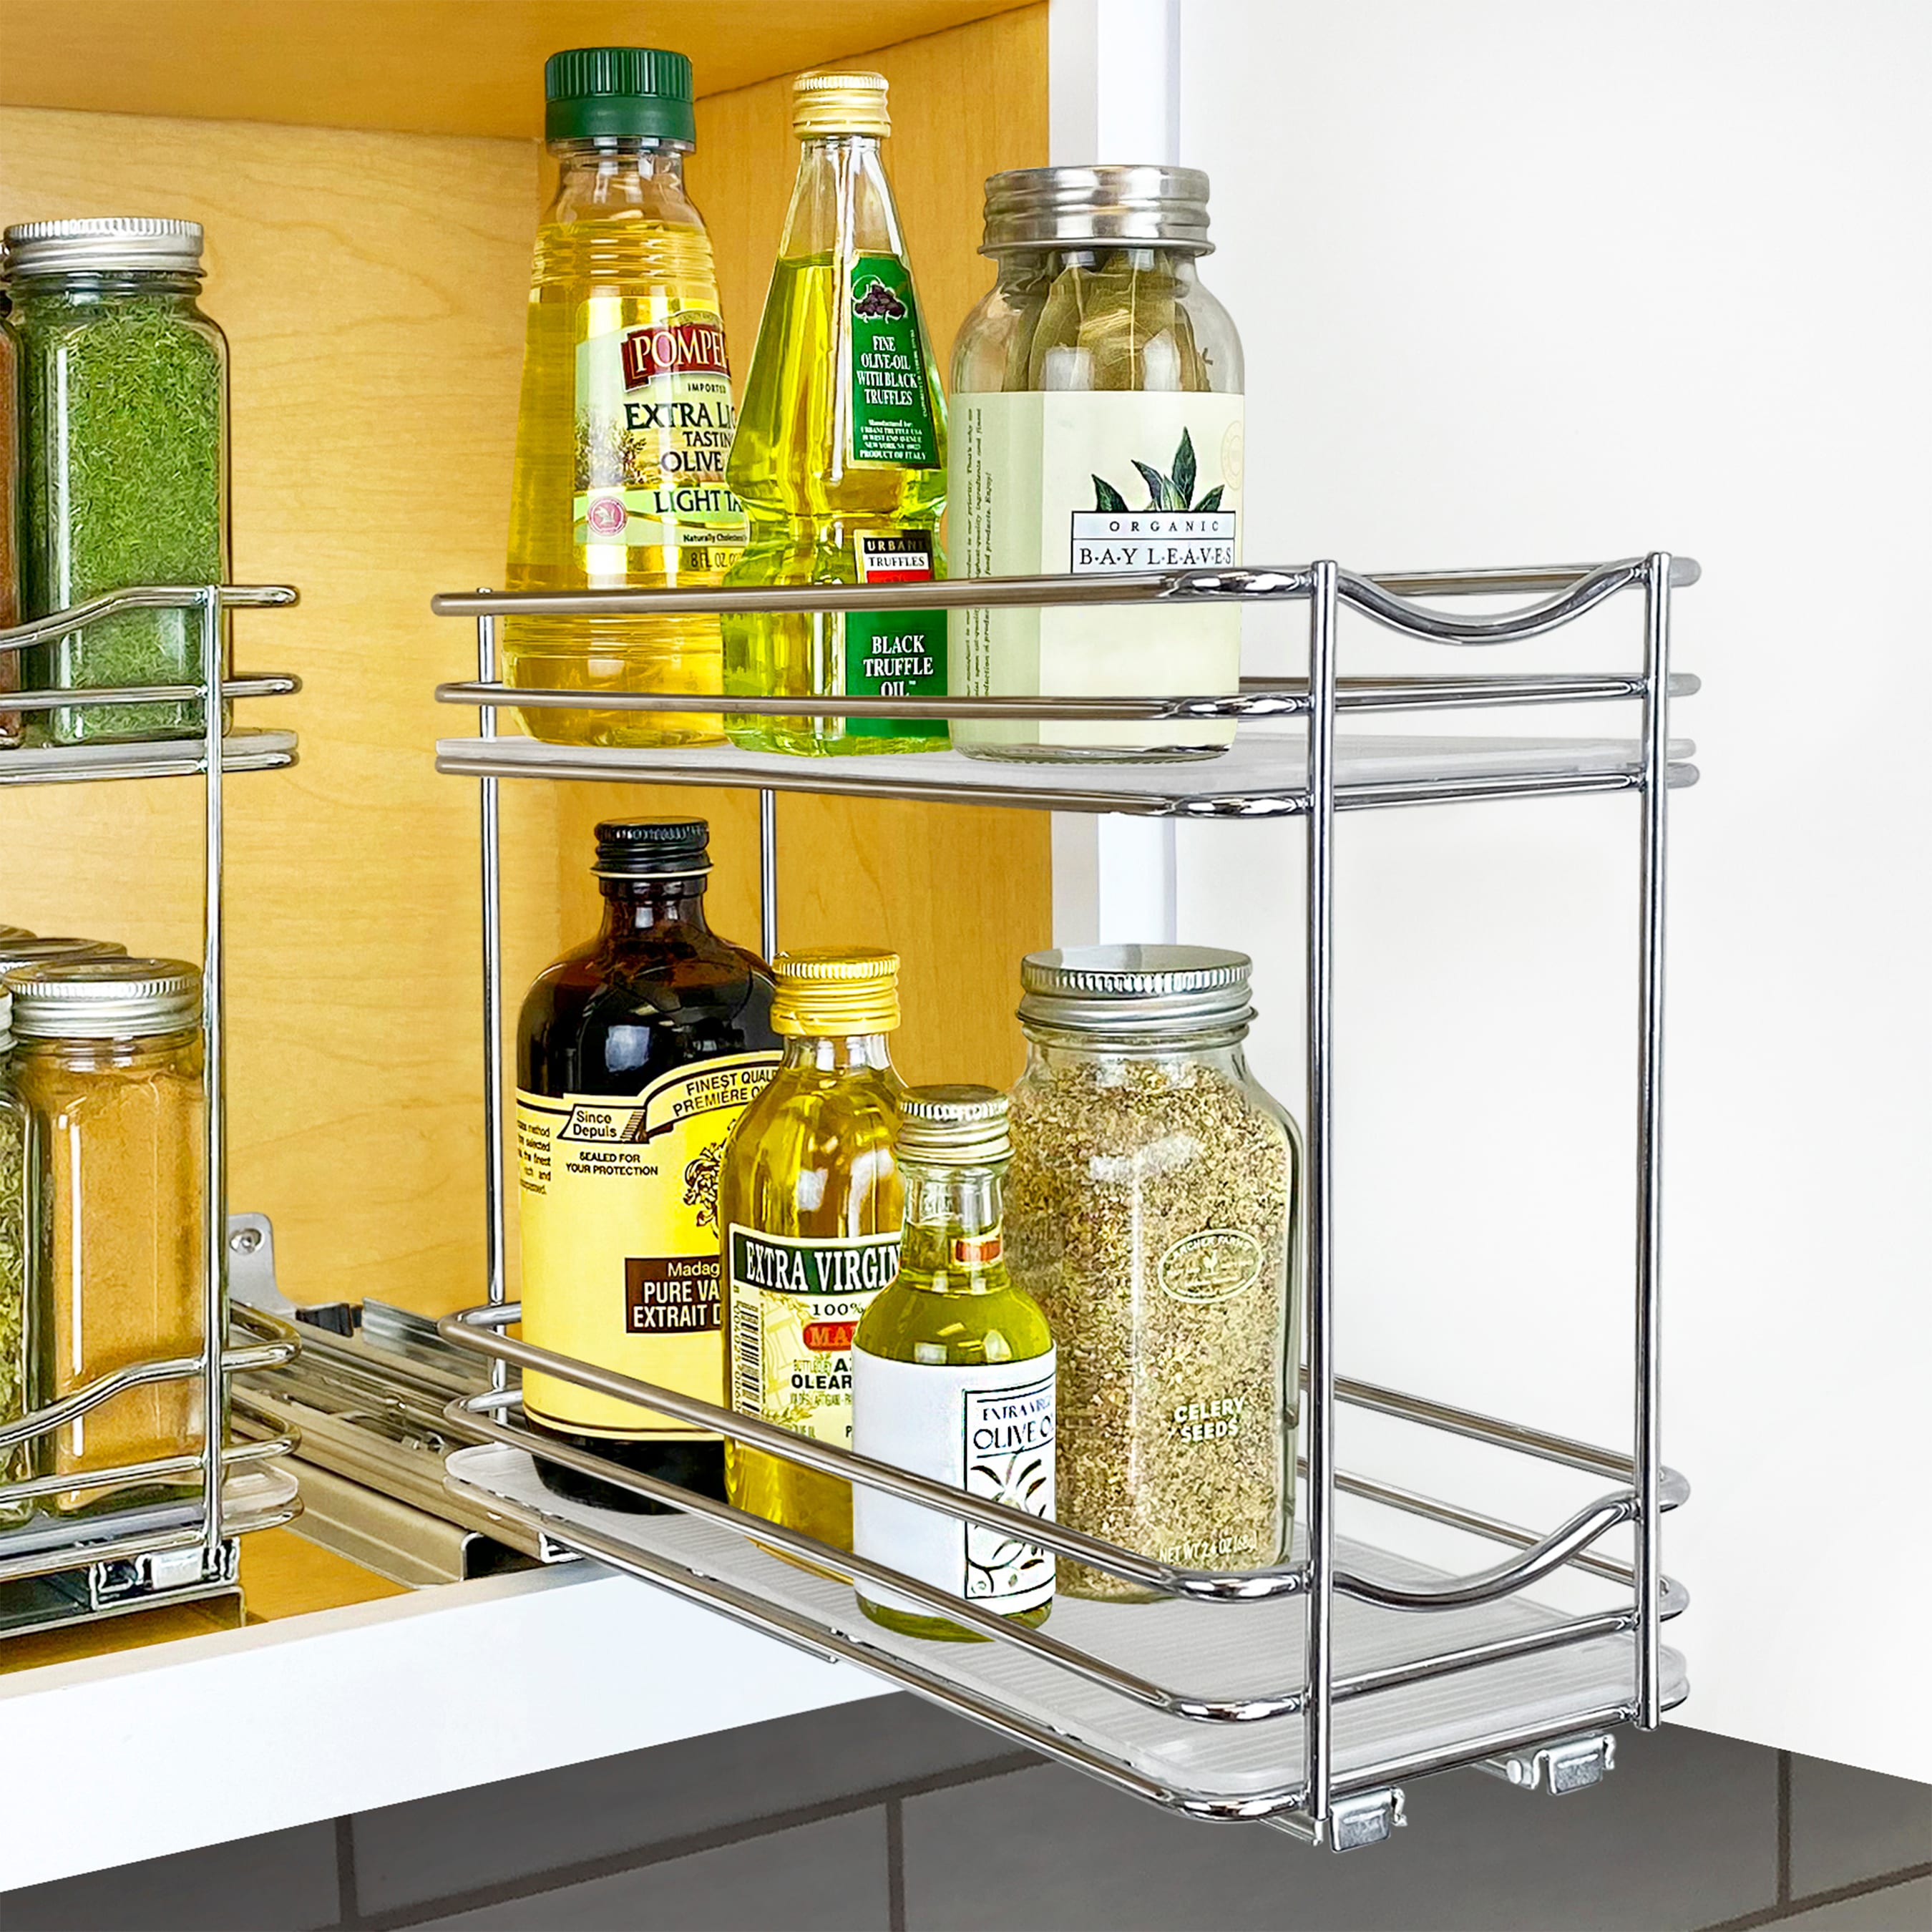 LYNK PROFESSIONAL LYNK PROFESSIONAL Elite Pull Out Spice Rack